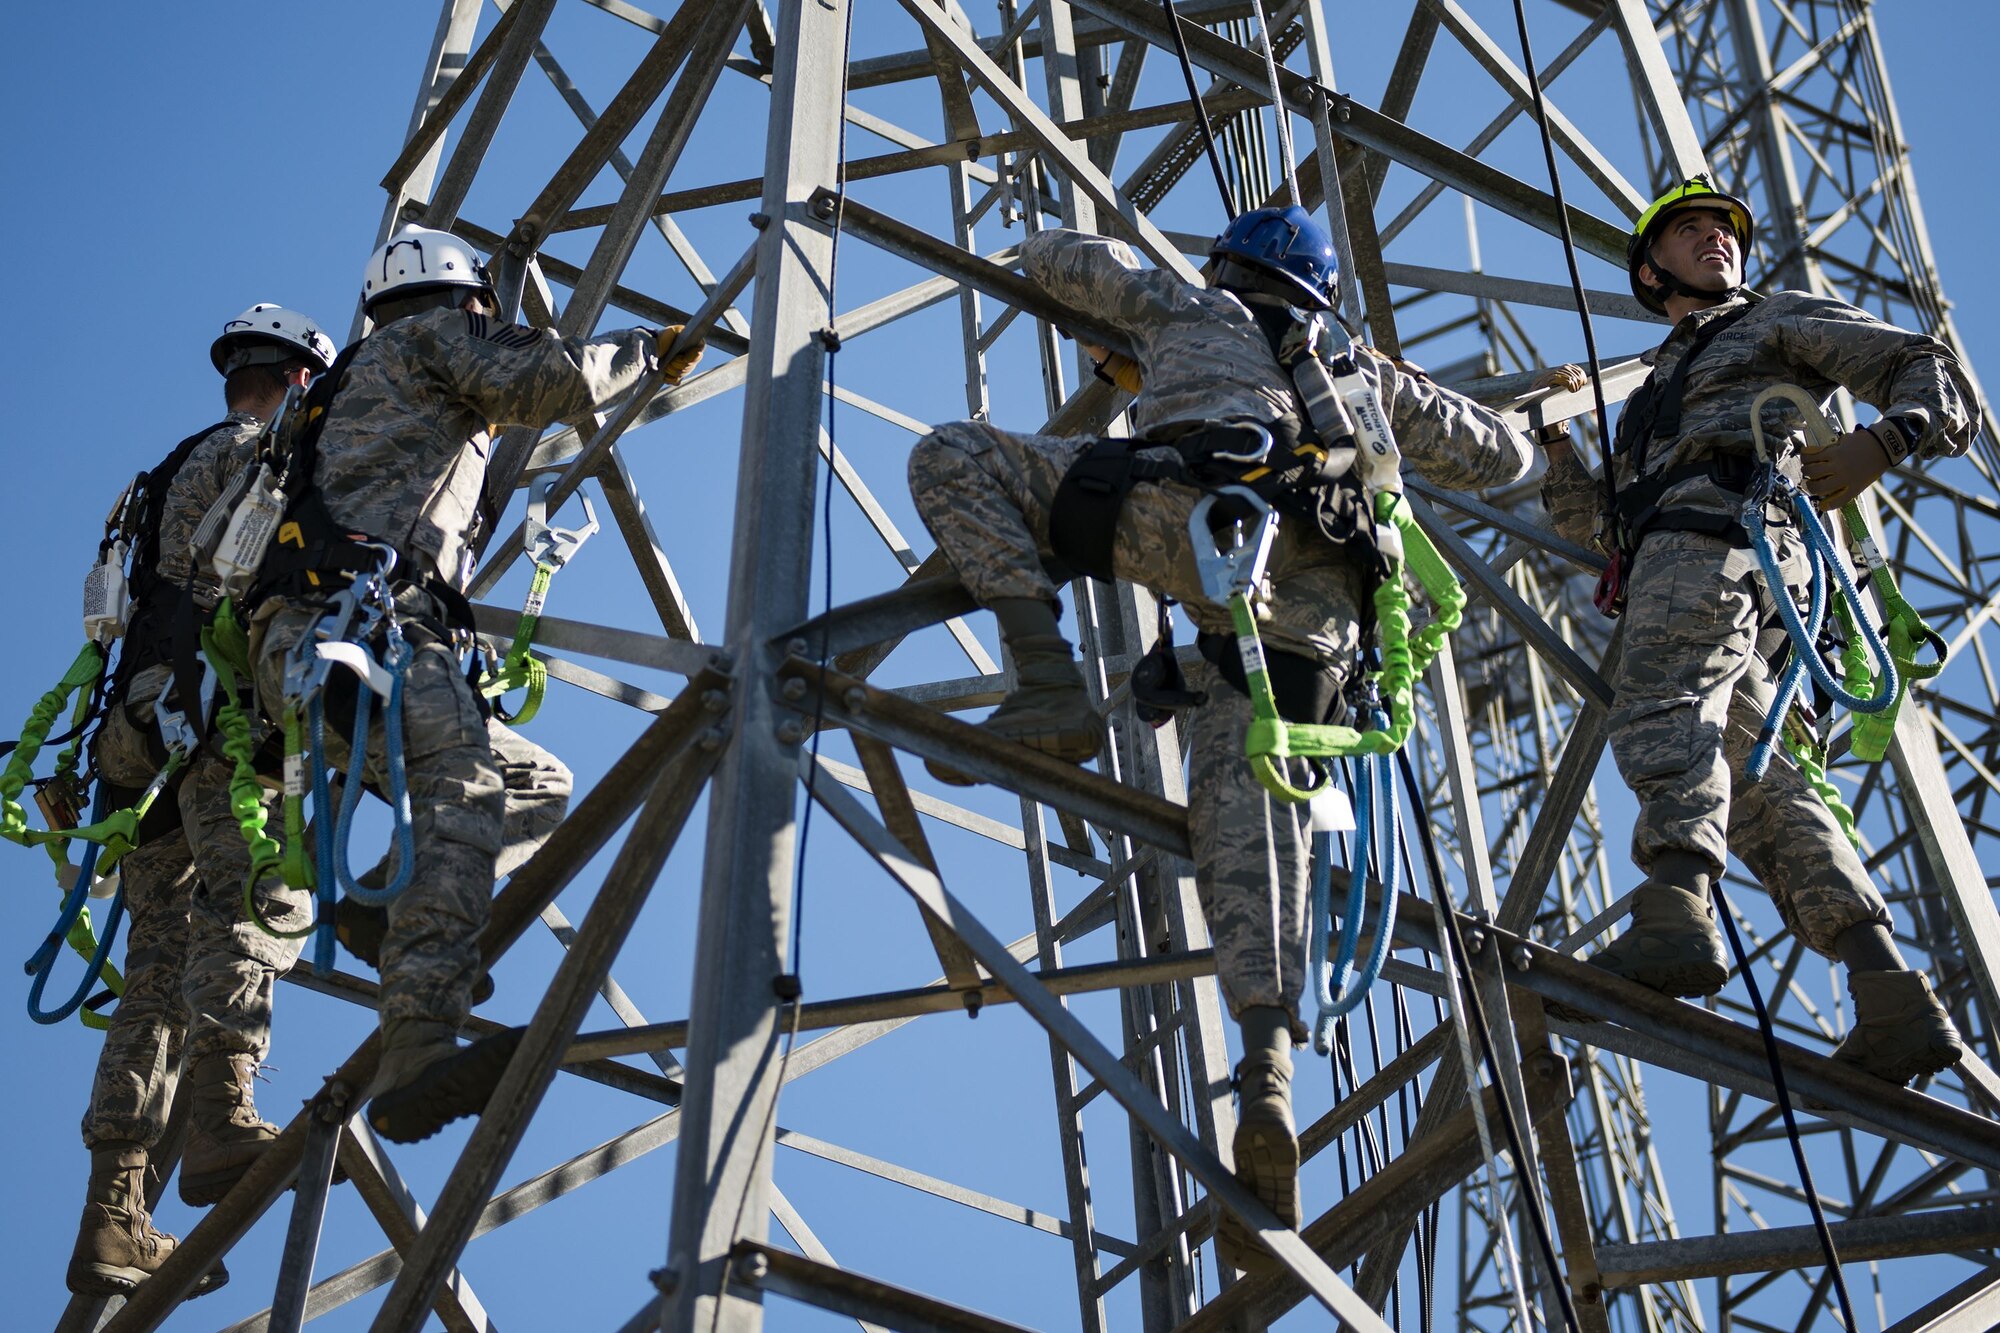 Team Moody Airmen and 23d Wing leadership climb a radio antenna tower during an immersion tour, Dec. 11, 2017, at Moody Air Force Base, Ga. Moody leadership visited the radar, airfield and weather systems facility to familiarize themselves with the 23d Operations Support Squadron’s duties and to gain a better understanding of how they impact the mission. (U.S. Air Force photo by Airman 1st Class Erick Requadt)